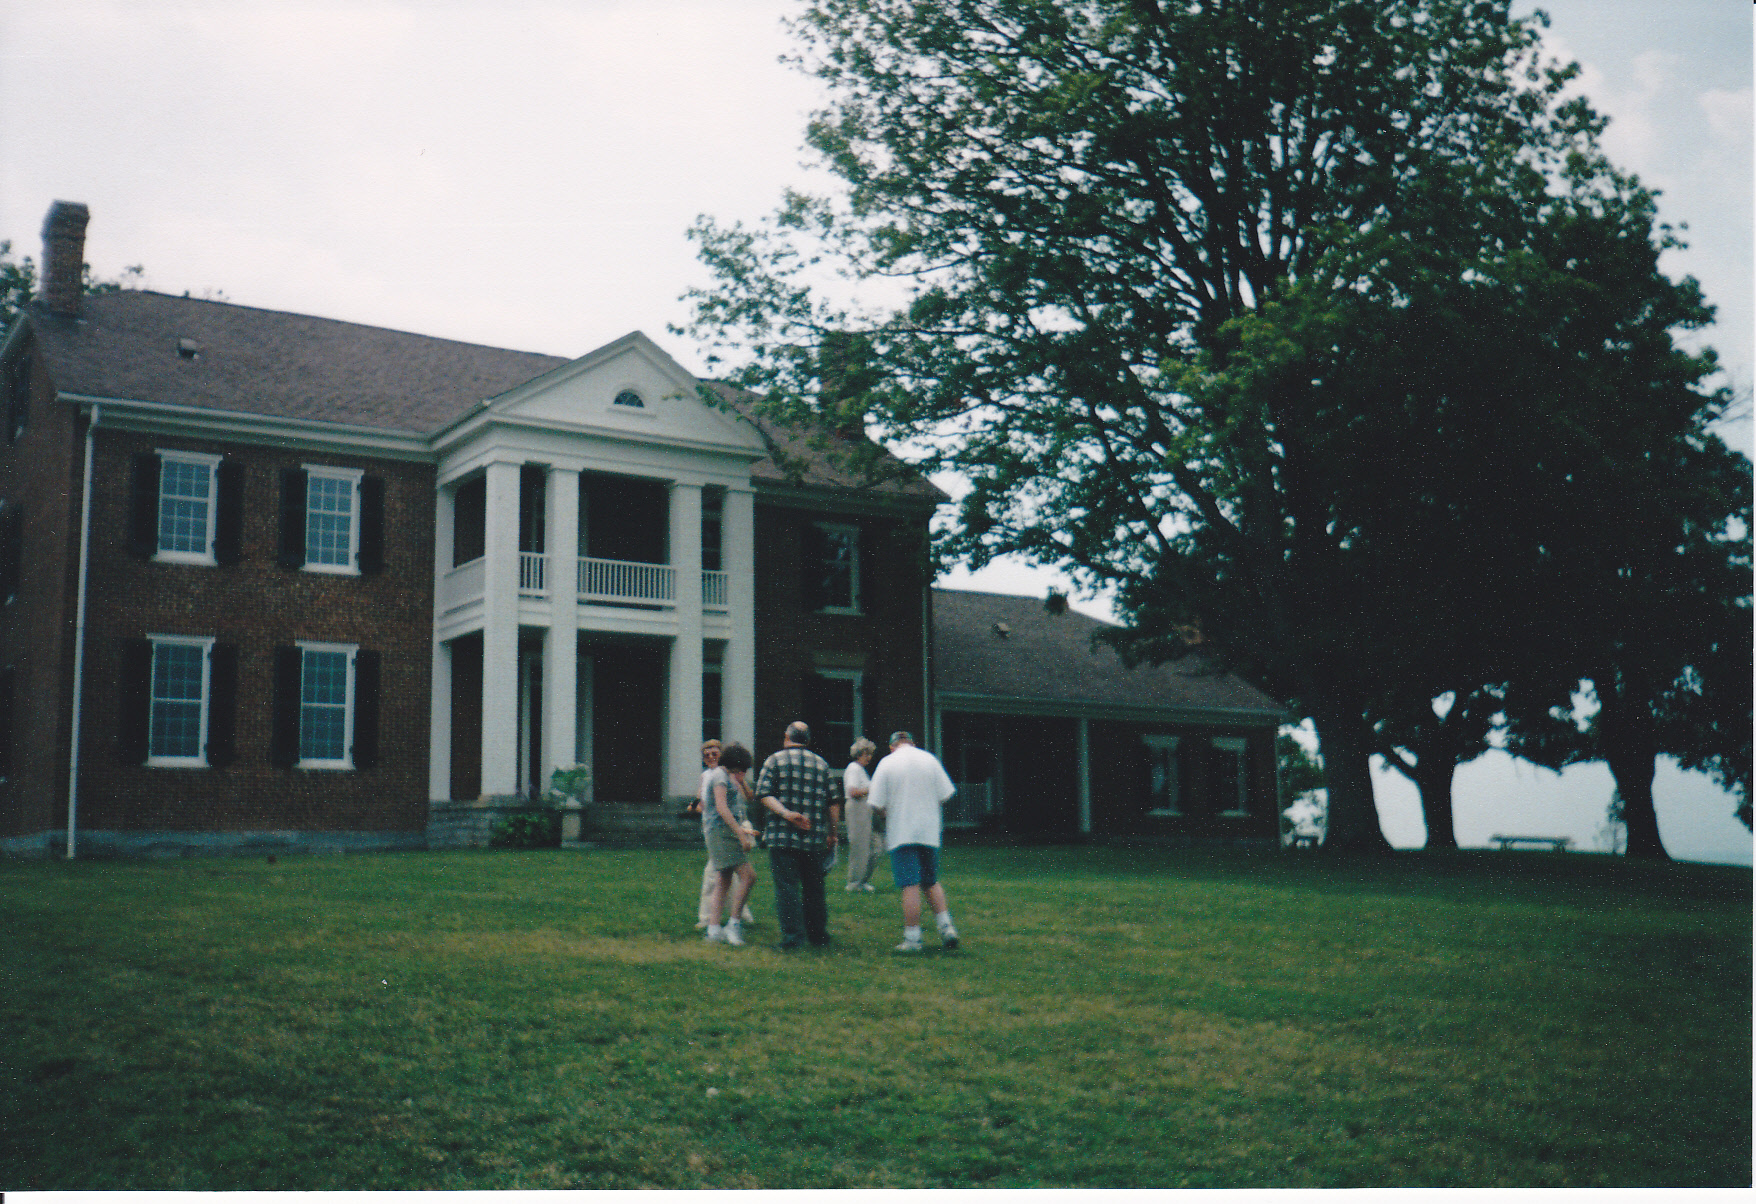 2005 OFHS meeting in Kentucky (OFHS members in front of Pleasant Retreat